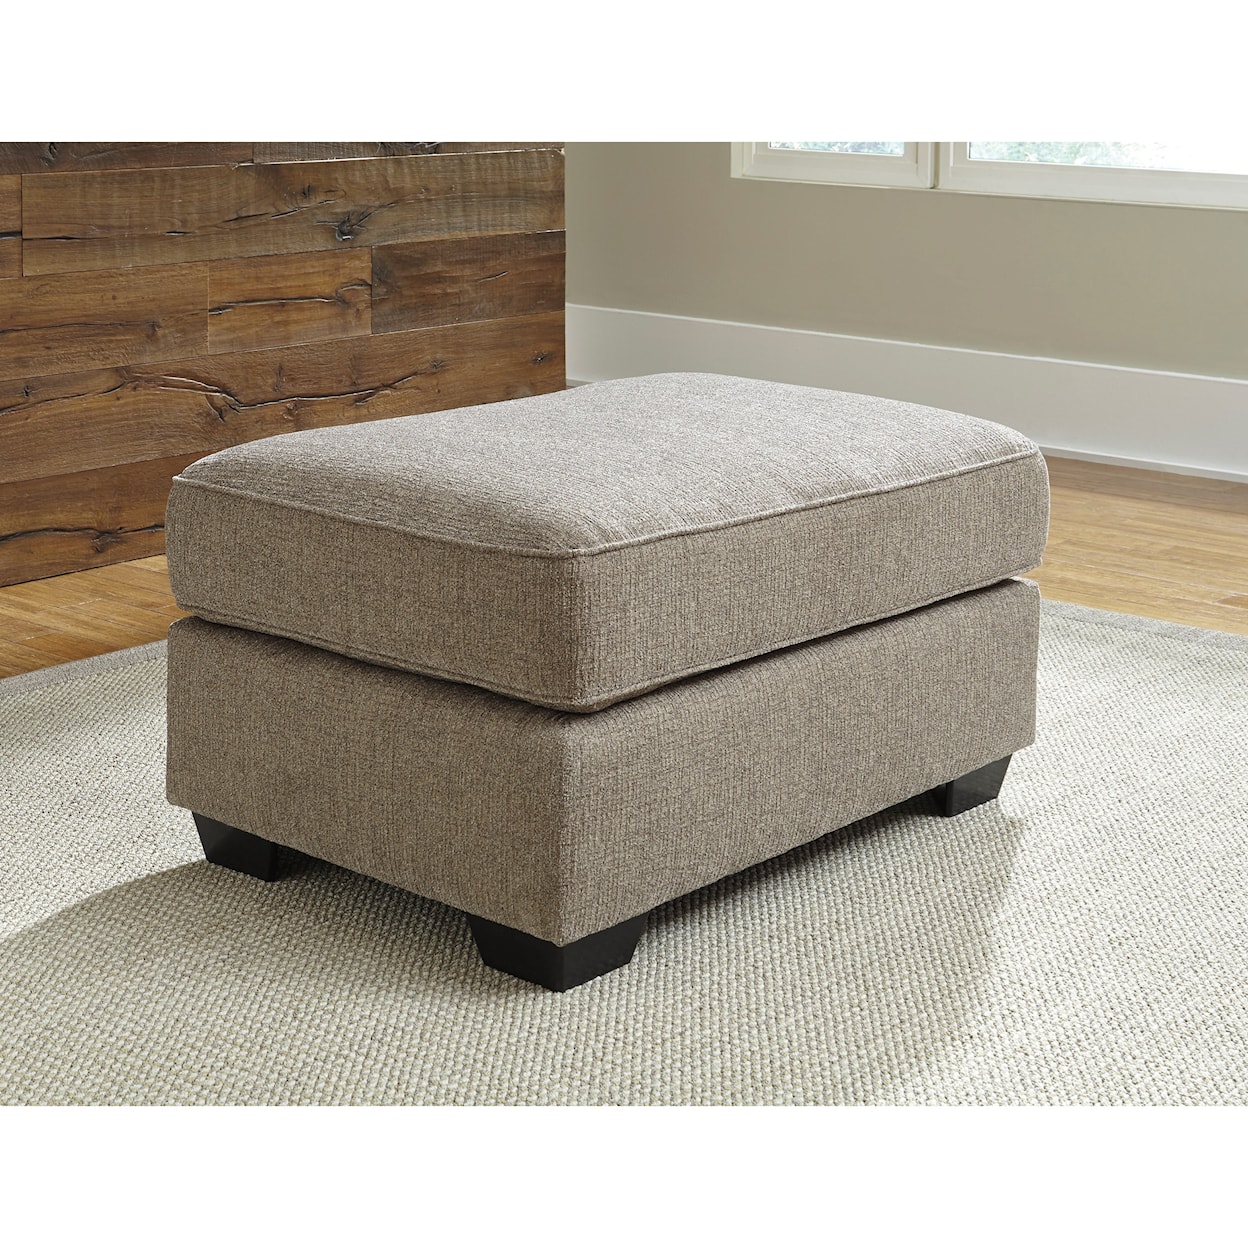 Benchcraft Pantomine Oversized Accent Ottoman